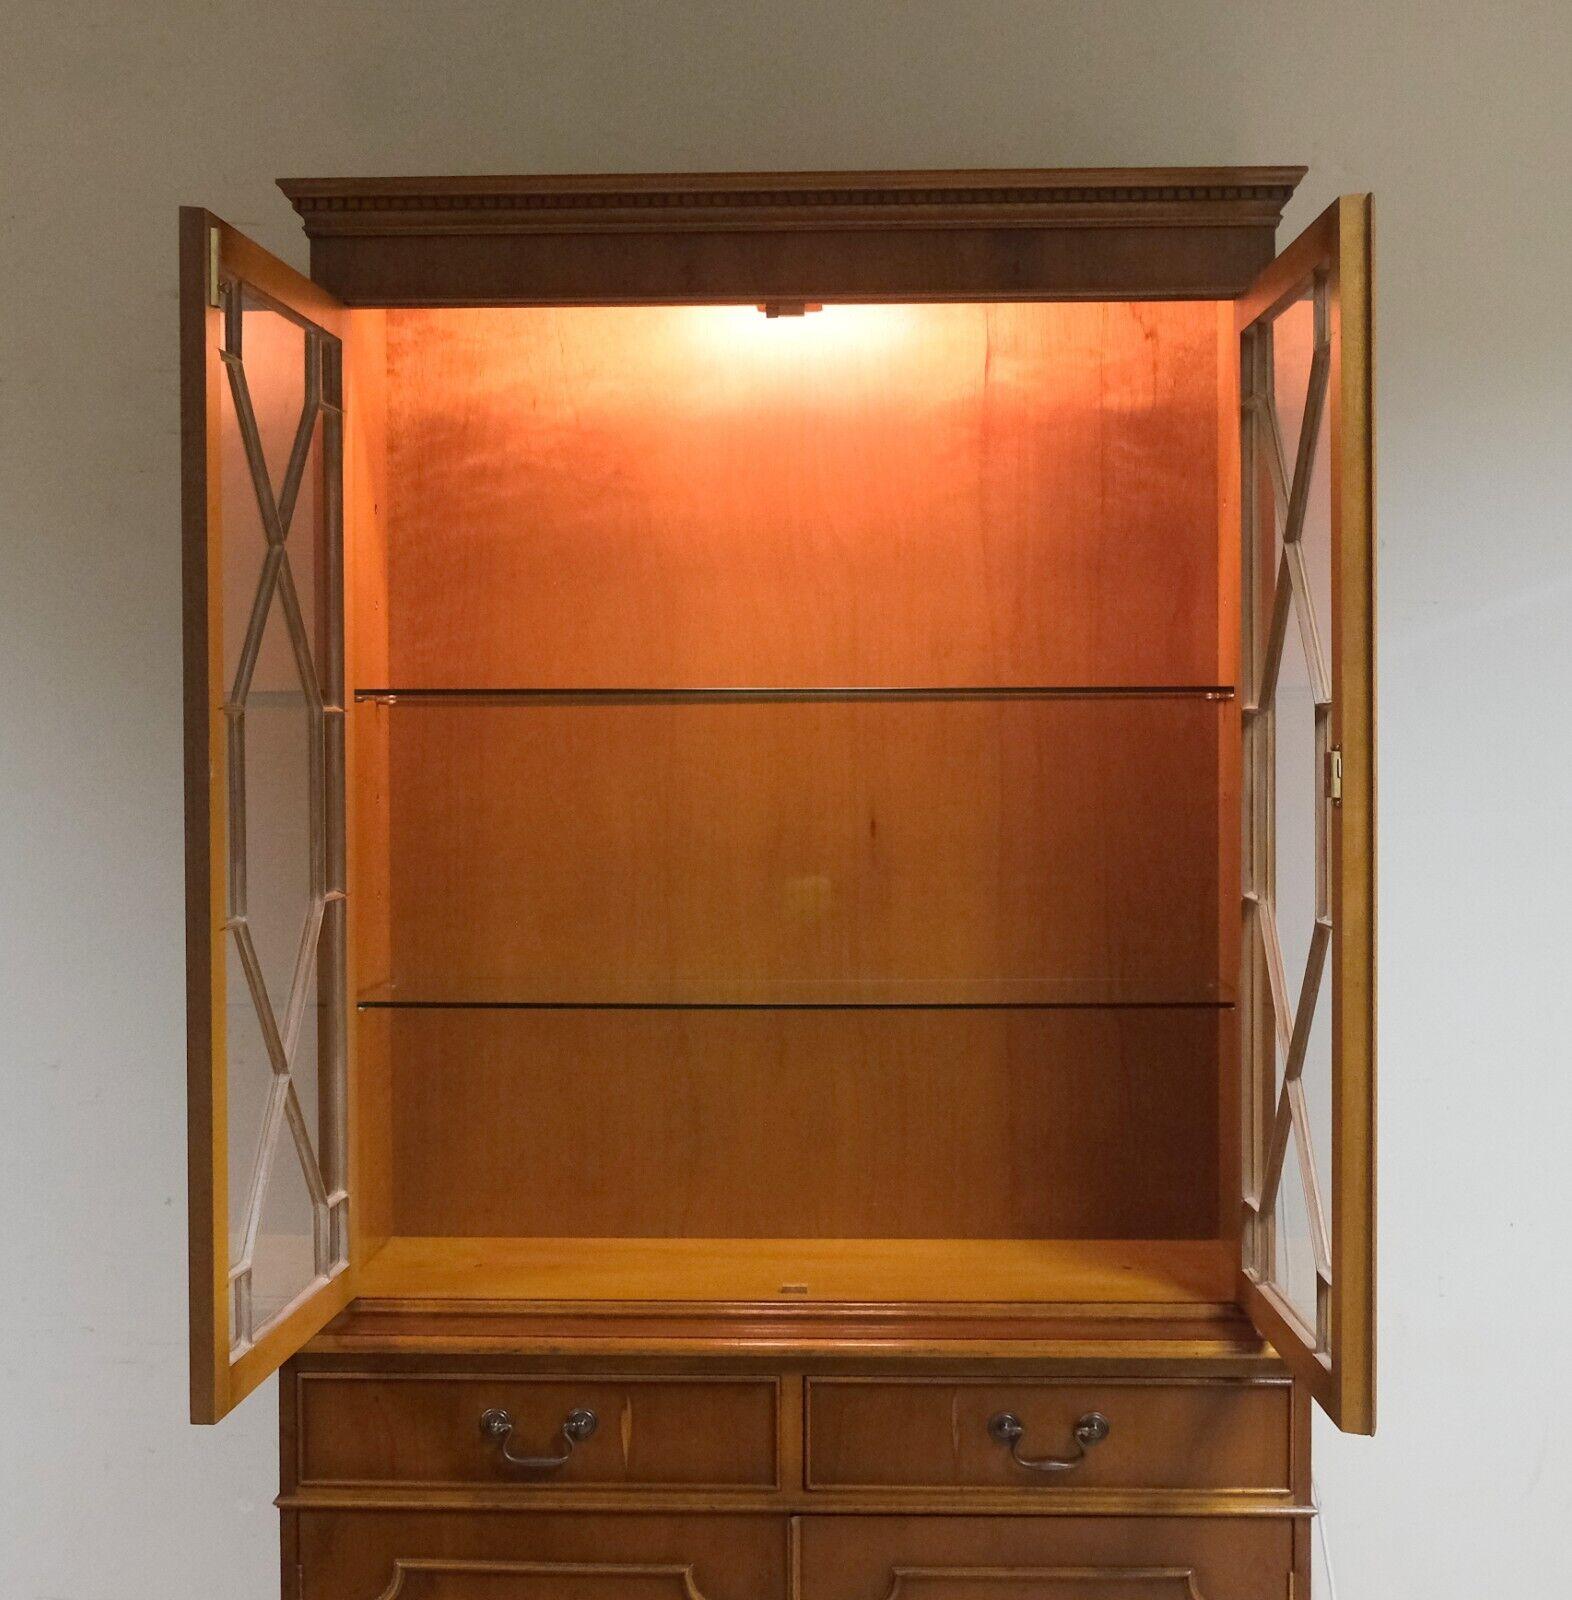 20th Century Beautiful Yew Wood Display Cabinet with Lights & Adjustable Glass Shelves